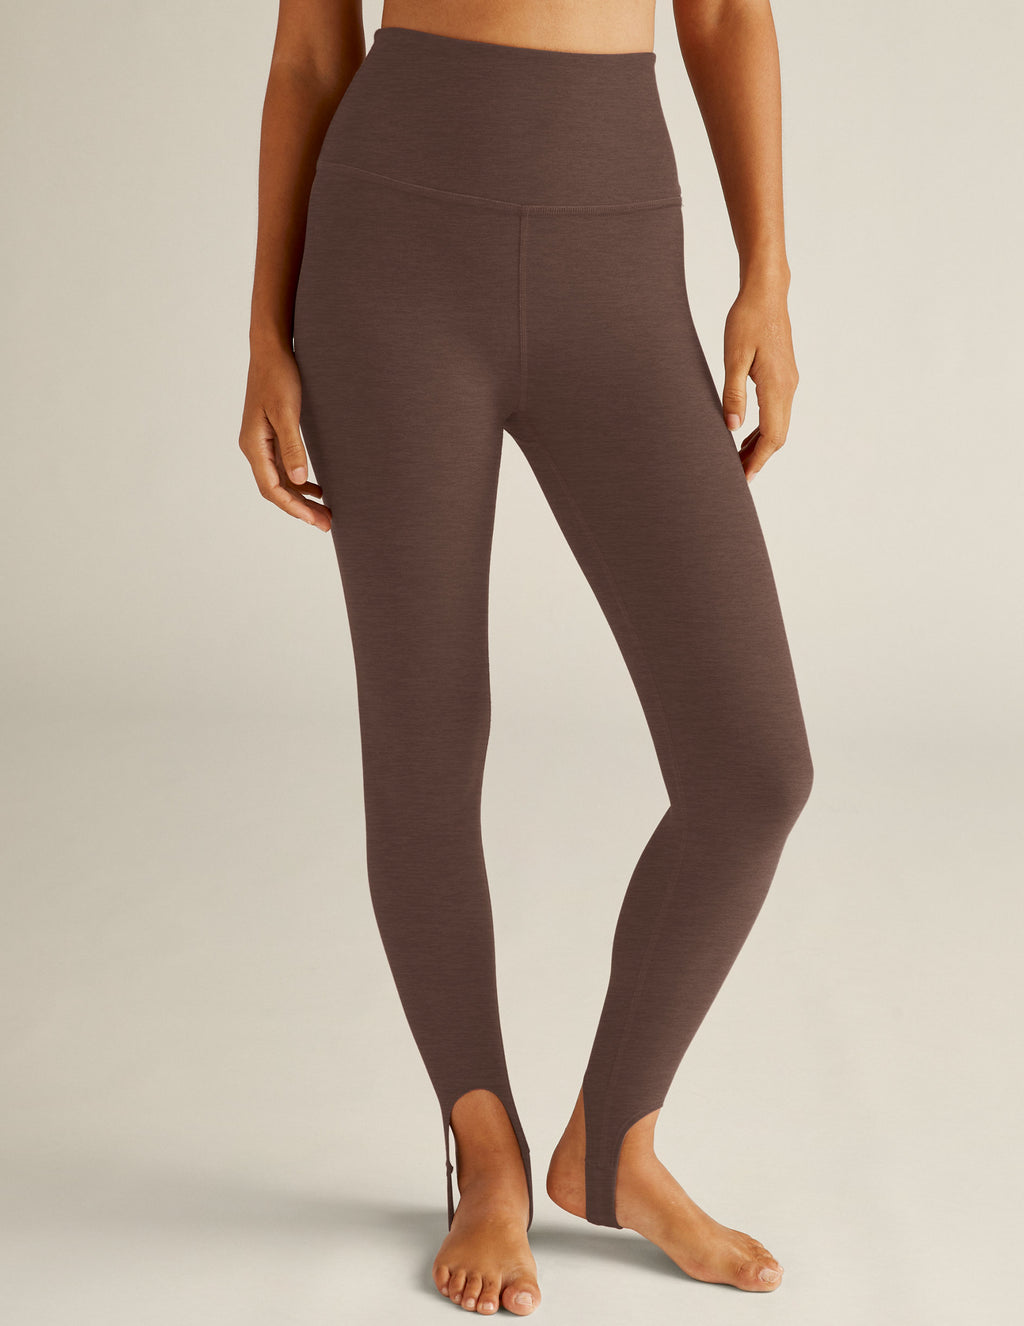 Spacedye Well Rounded Stirrup Legging Featured Image